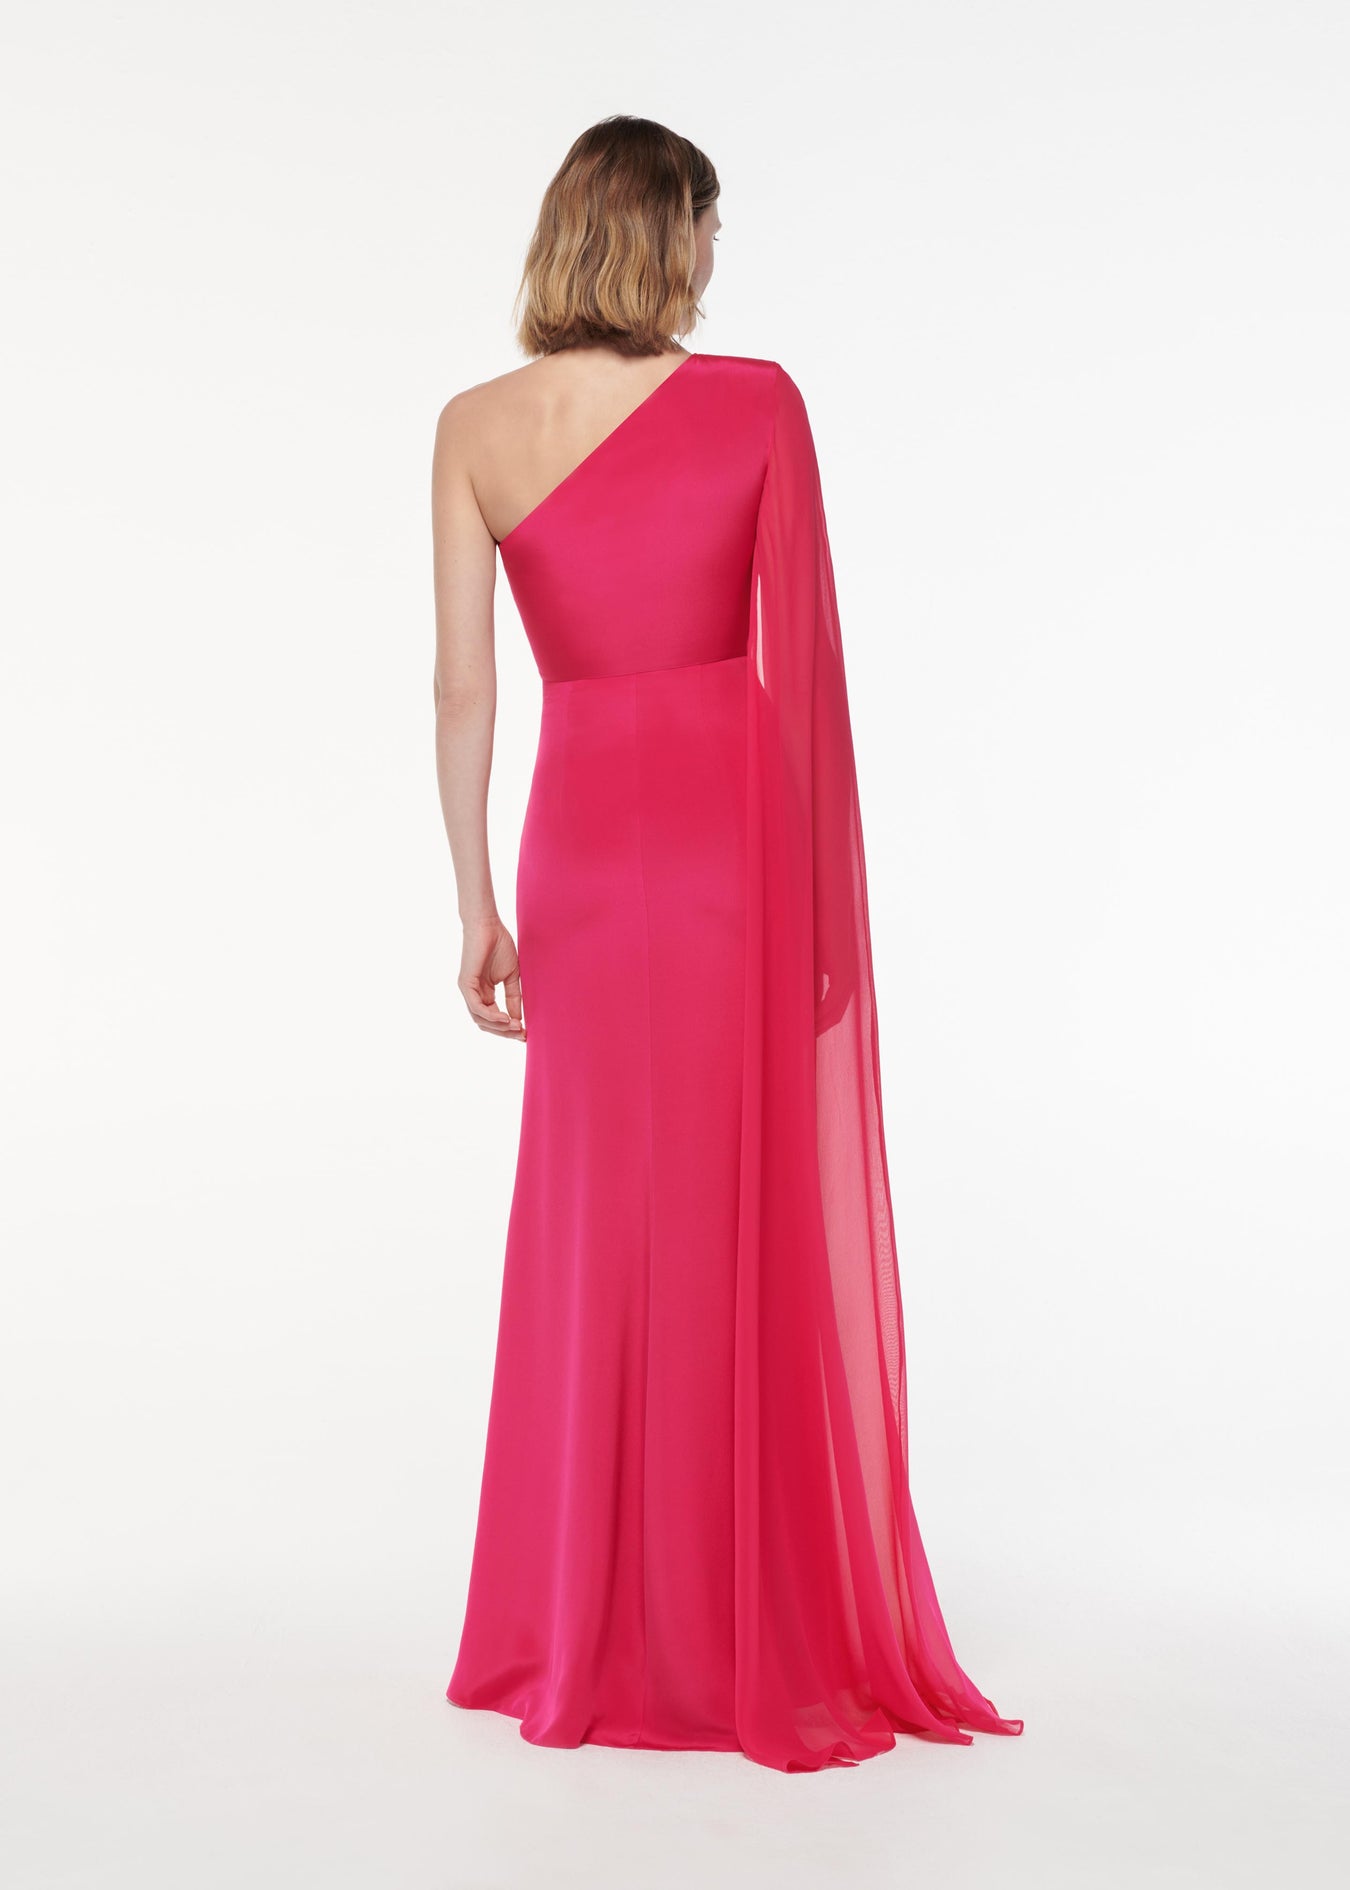 A photograph of a woman wearing aAsymmetric Silk Gown in Pink